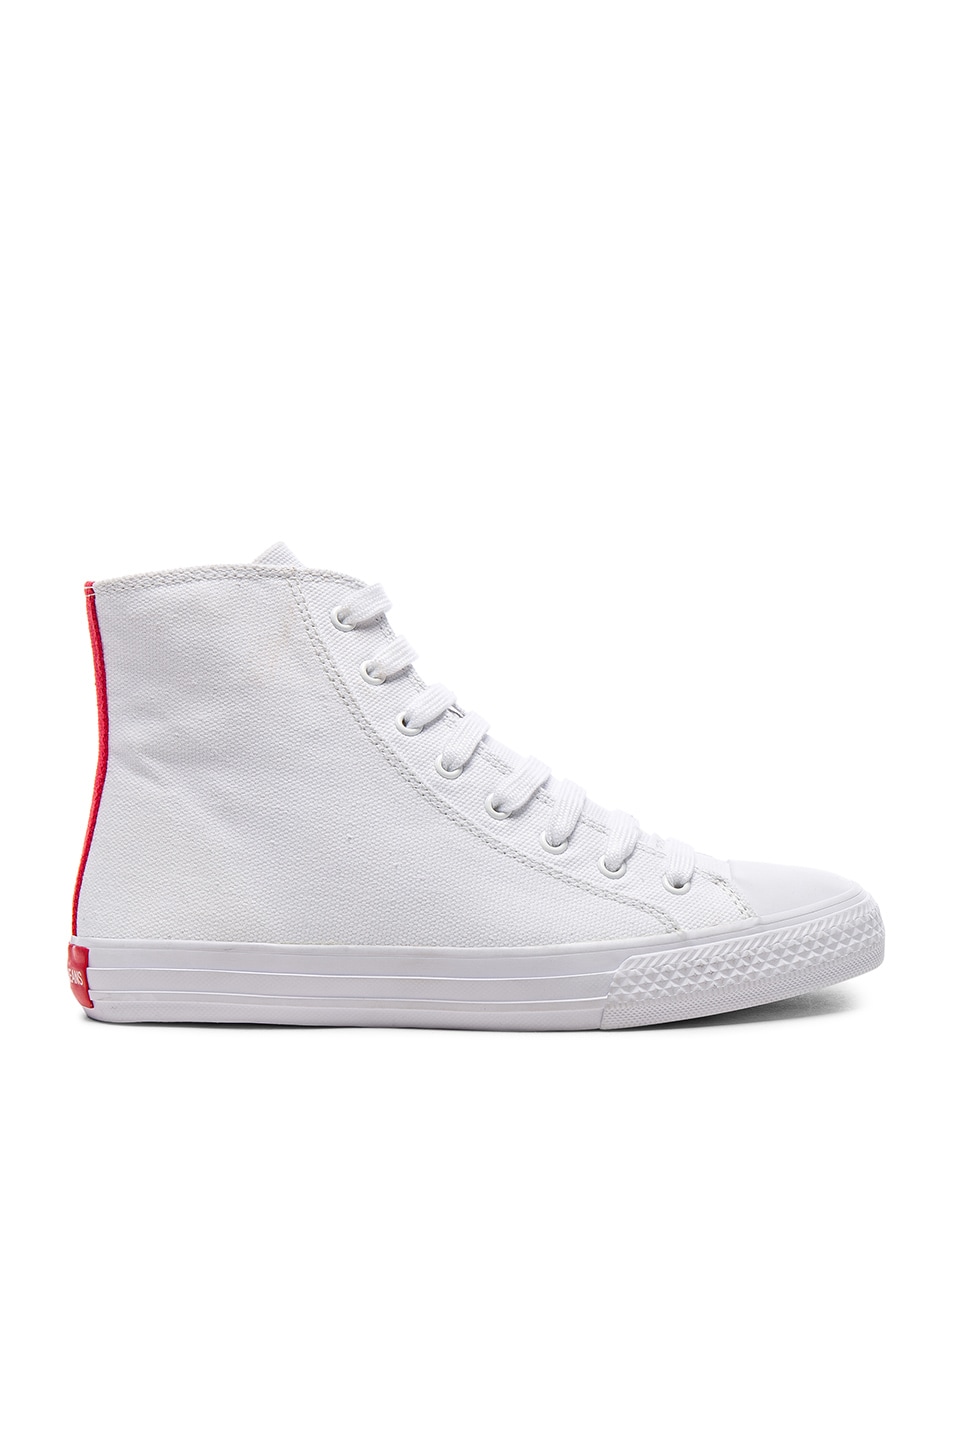 Image 1 of CALVIN KLEIN 205W39NYC Canvas High-Top Sneakers in White & Red